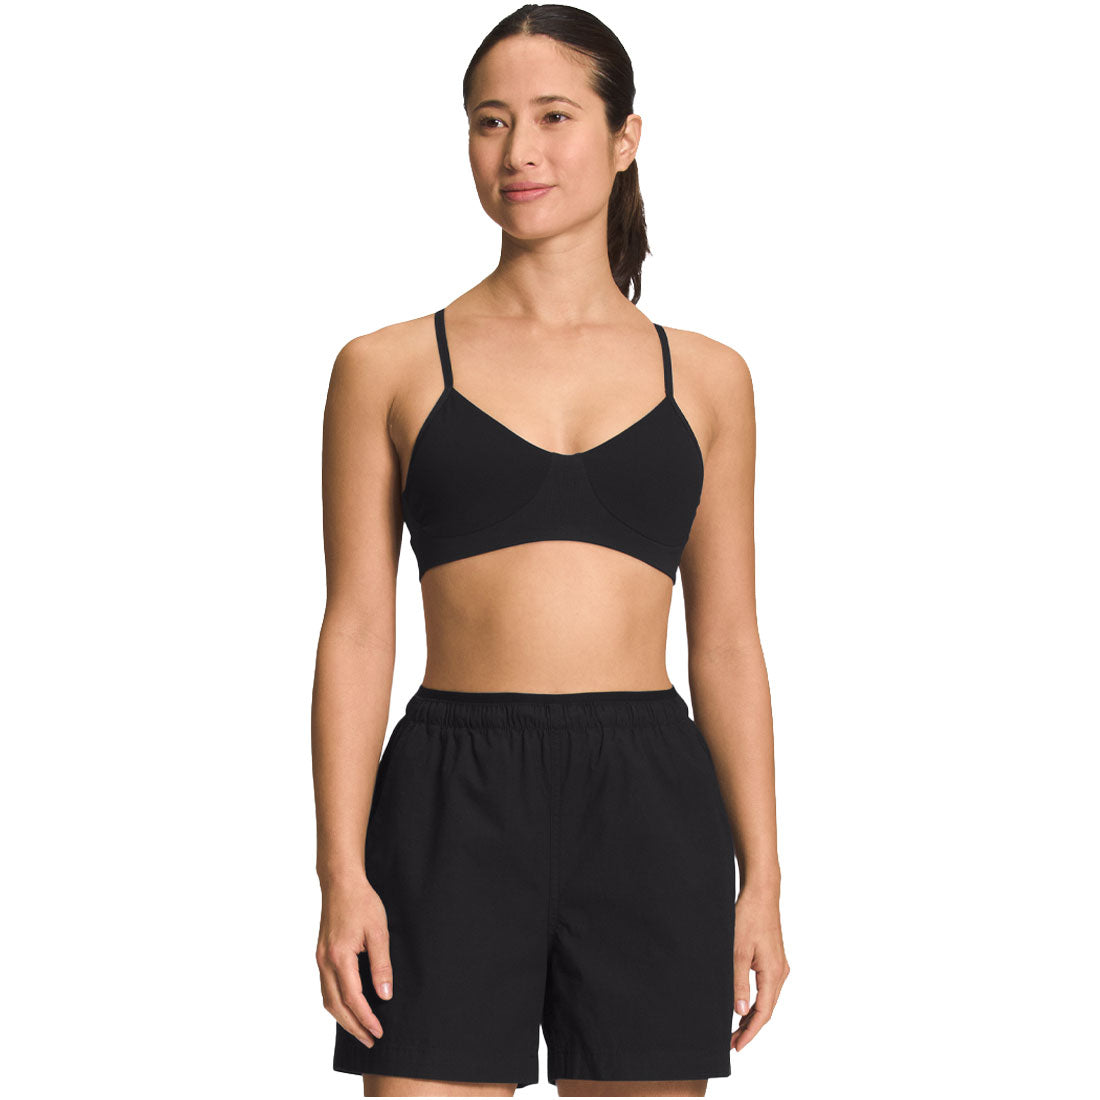 The North Face Lead In Bralette - Women's